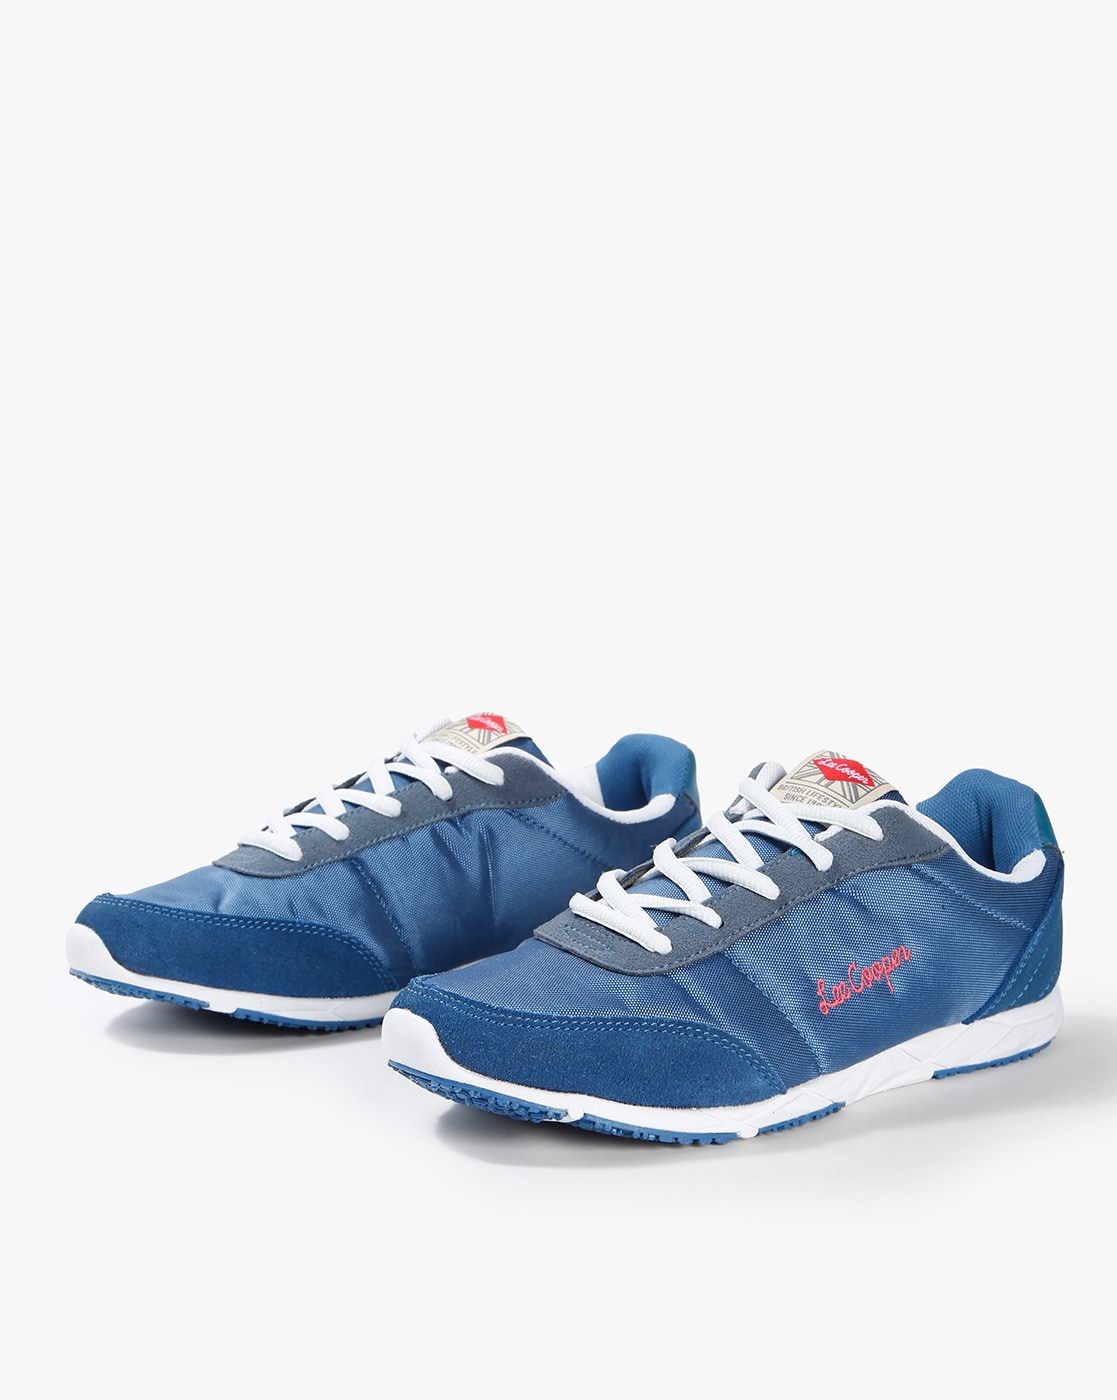 Sports Shoes for Women by Lee Cooper 